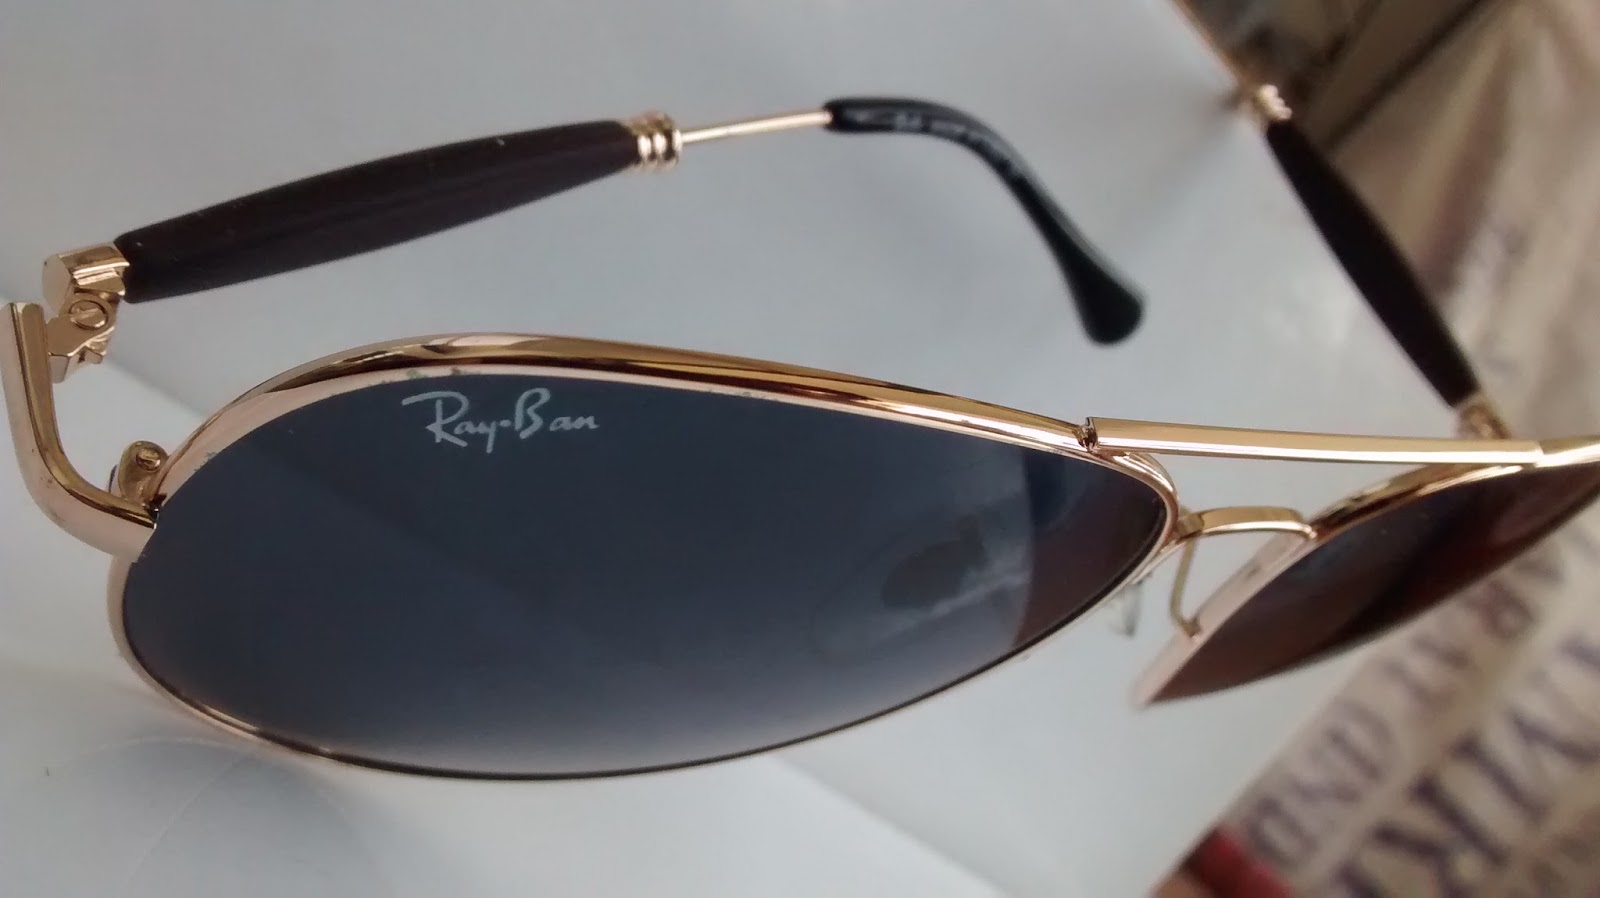 Rb3517 New Arrival Gold Frame Solid Black Aviator Size M Price 999 First Copy Ray Ban Sunglasses India Rs599 Only